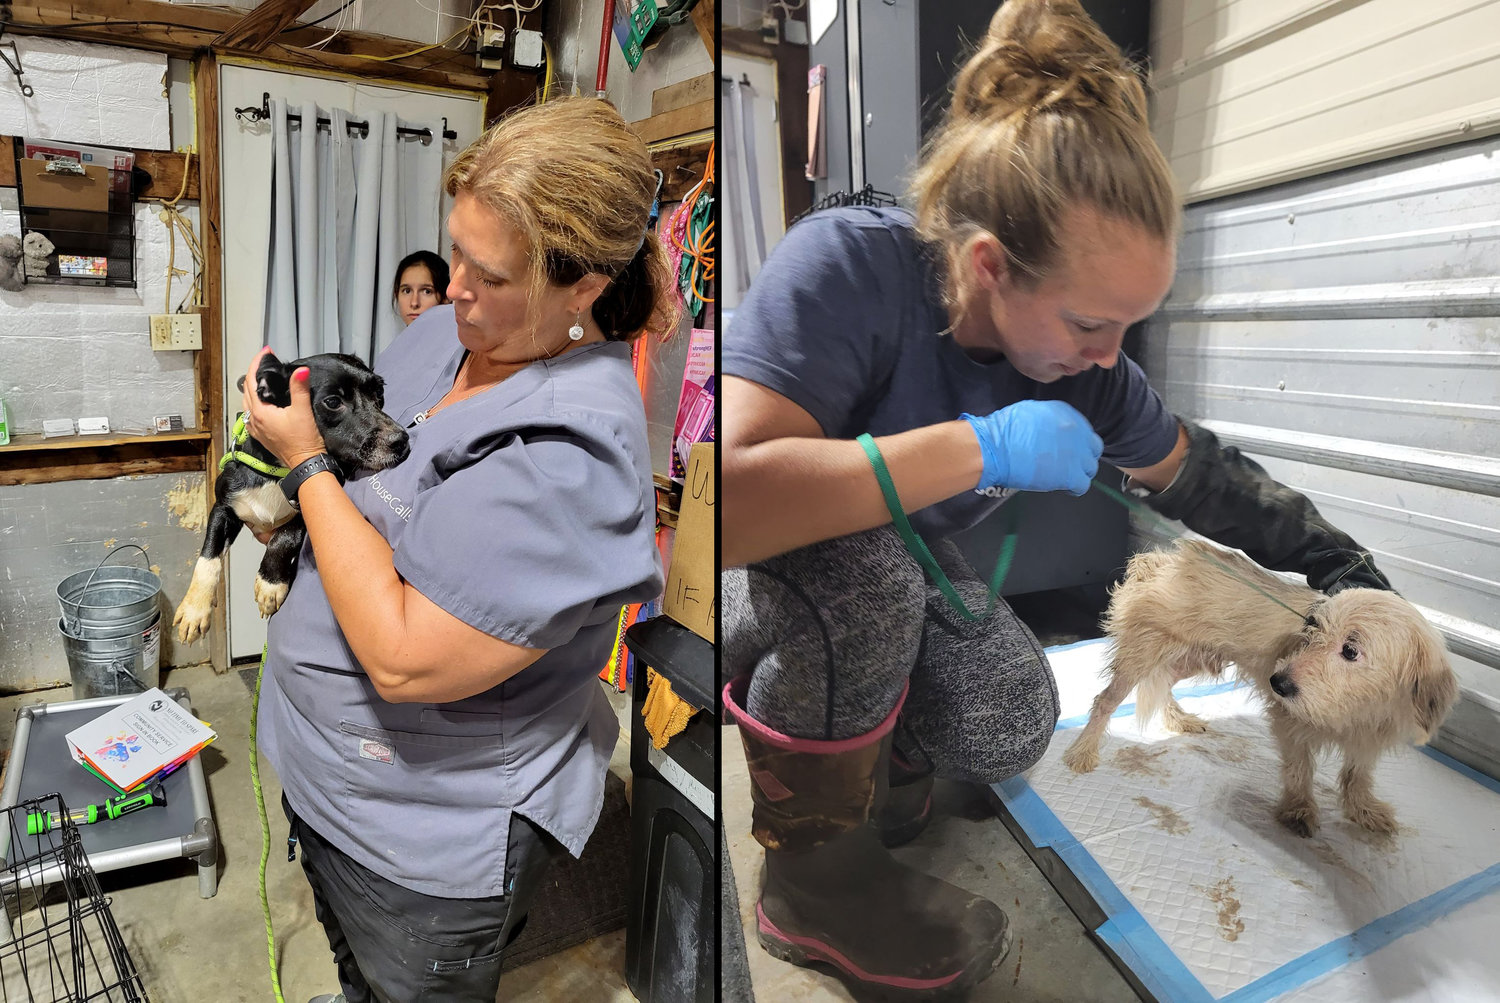 ANIMAL RESCUE – Volunteers at No Time To Spare Animal Rescue in Pendleton examine dogs that were recovered from run-down homes in Hawk Point and Warrenton. A total of about 50 dogs were recovered from deplorable conditions.